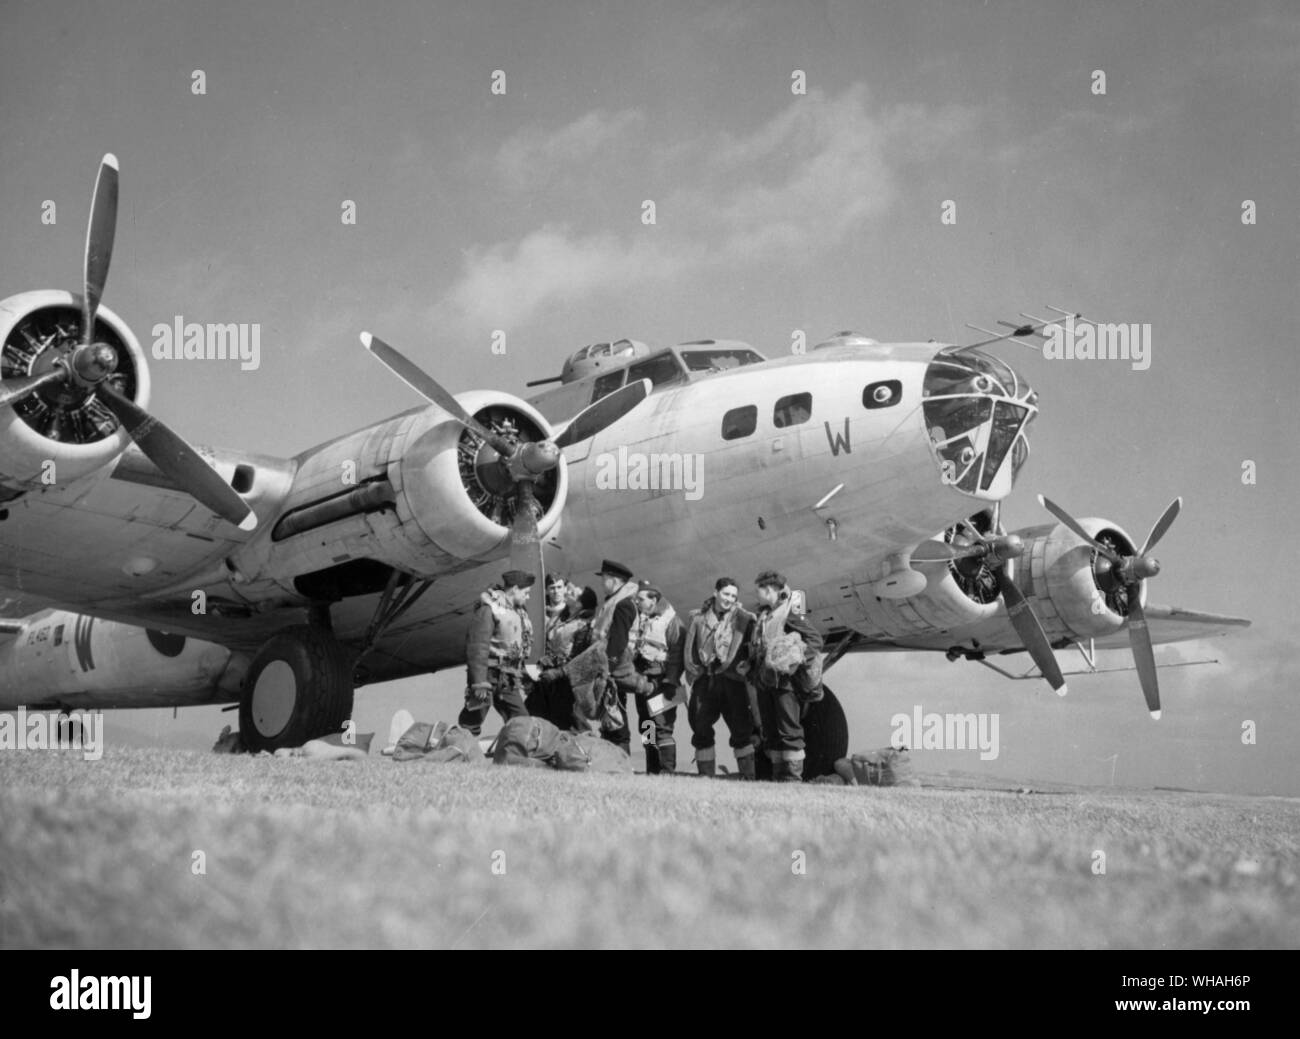 Radar devices on RAF Aircraft. A RAF Coastal Command Flying Fortress with Radar equipment extending from the nose and beneath the wings Stock Photo